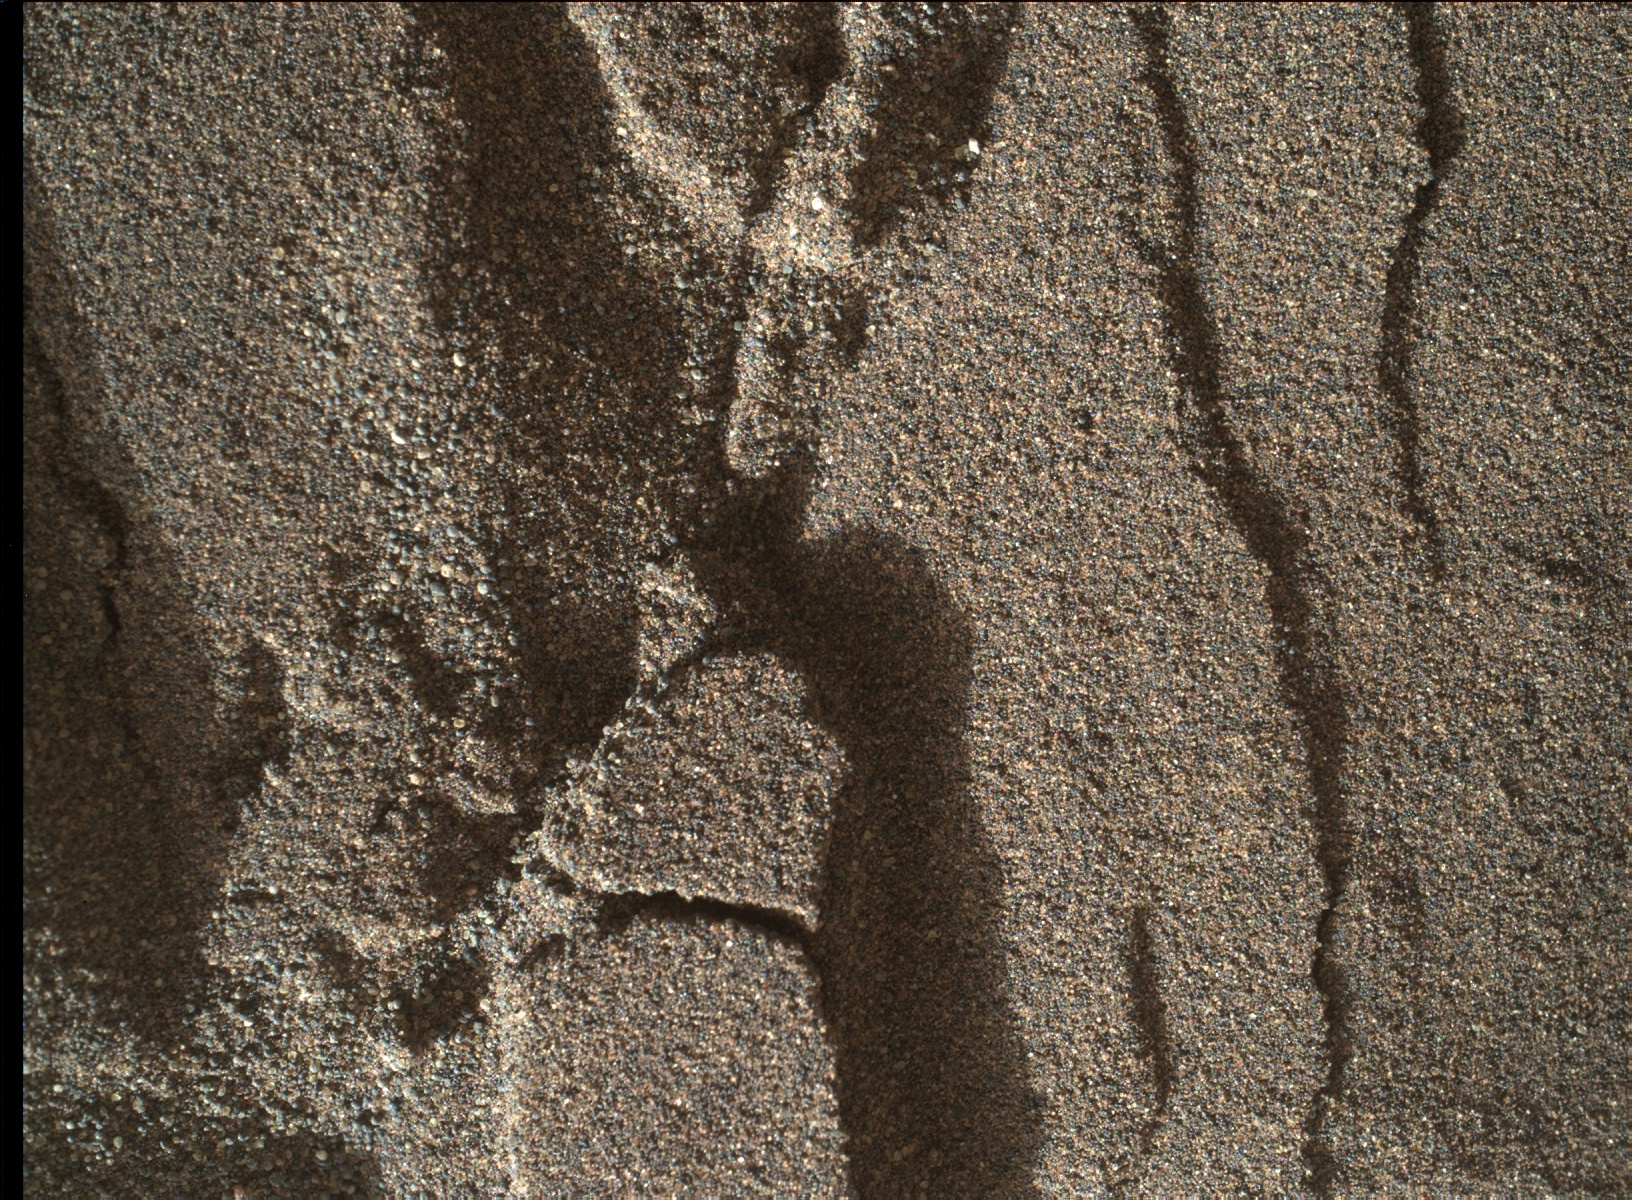 Nasa's Mars rover Curiosity acquired this image using its Mars Hand Lens Imager (MAHLI) on Sol 1182